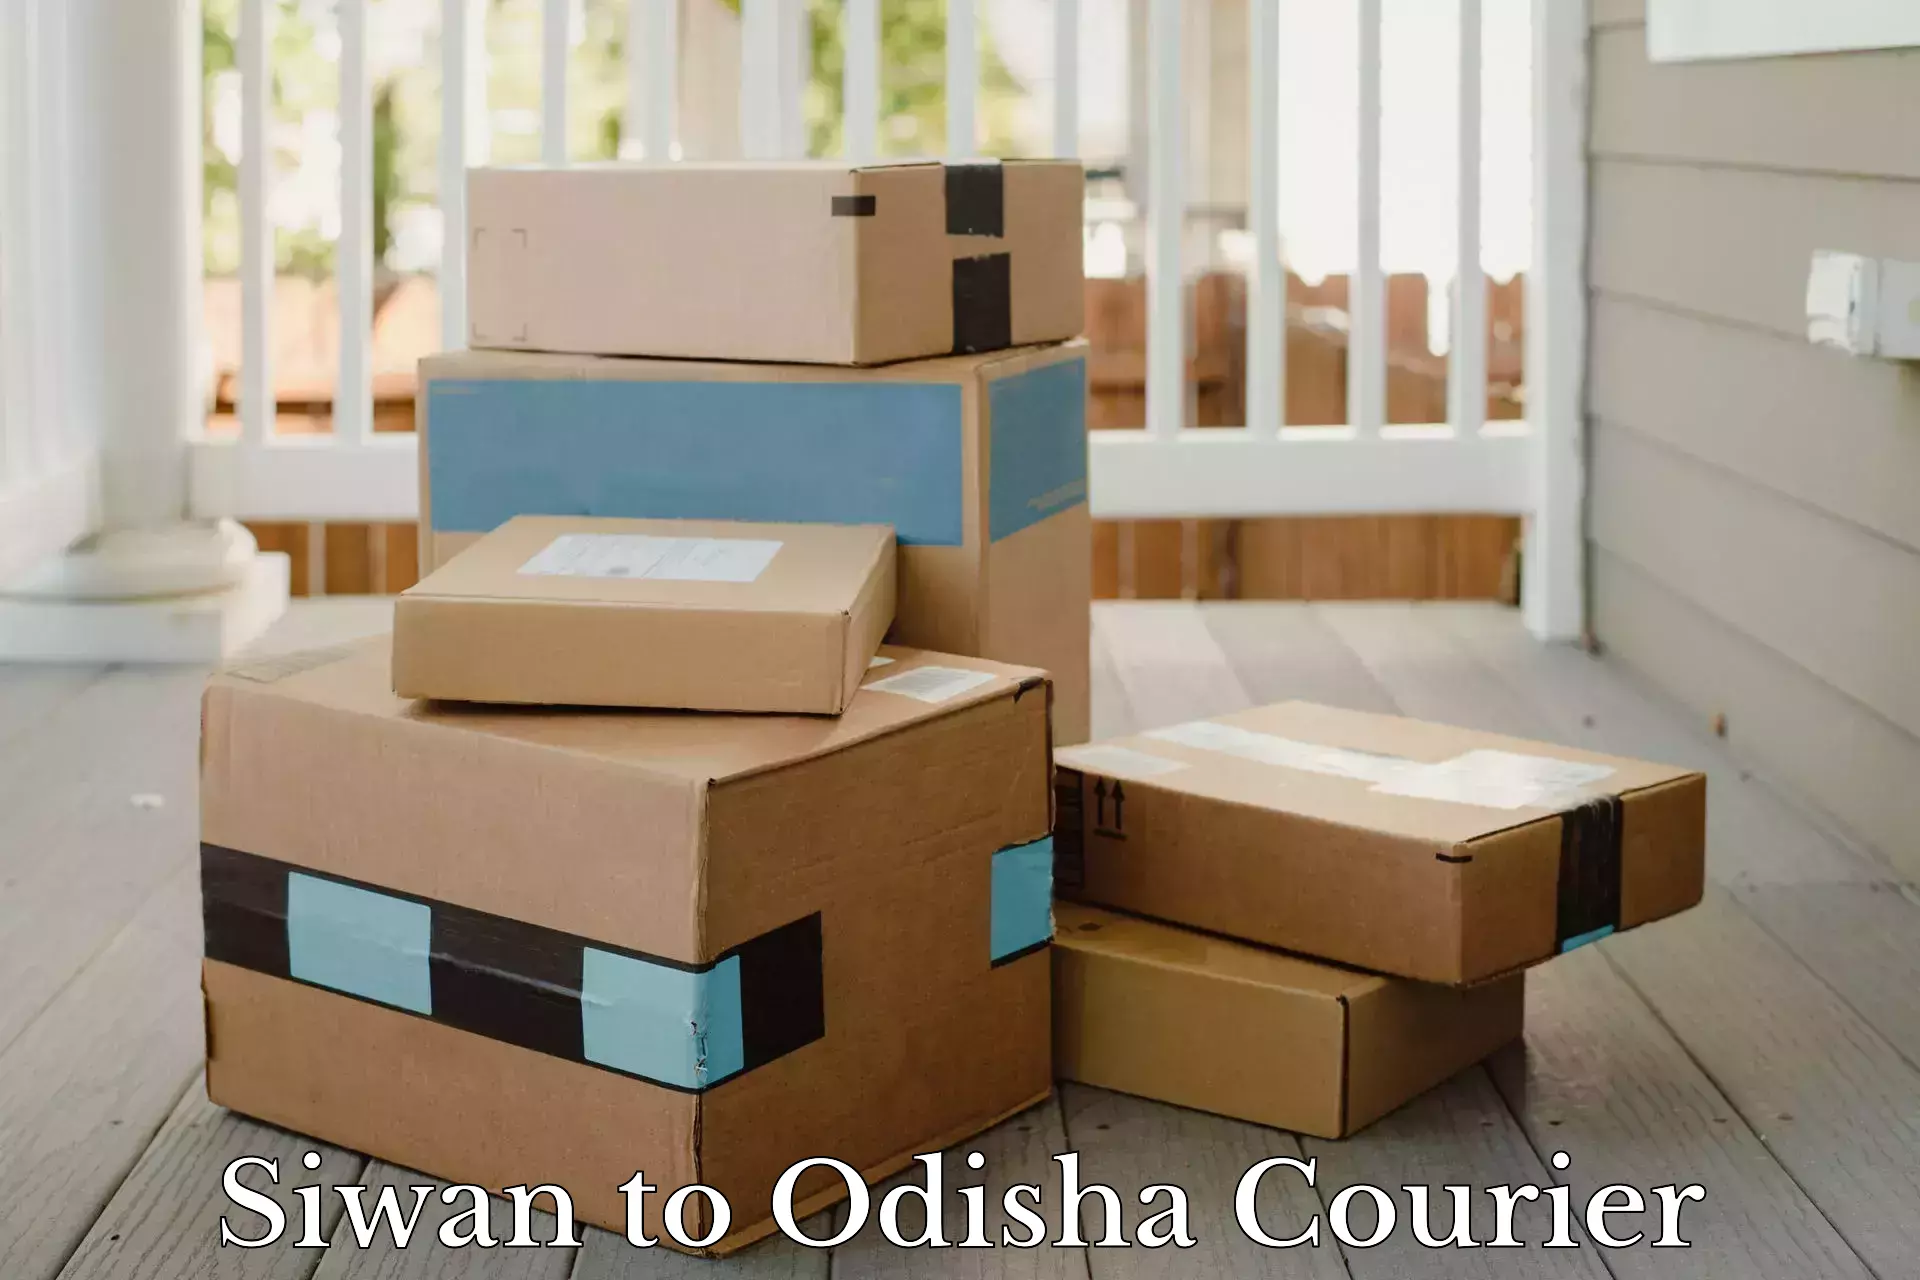 Courier service comparison Siwan to Phulbani